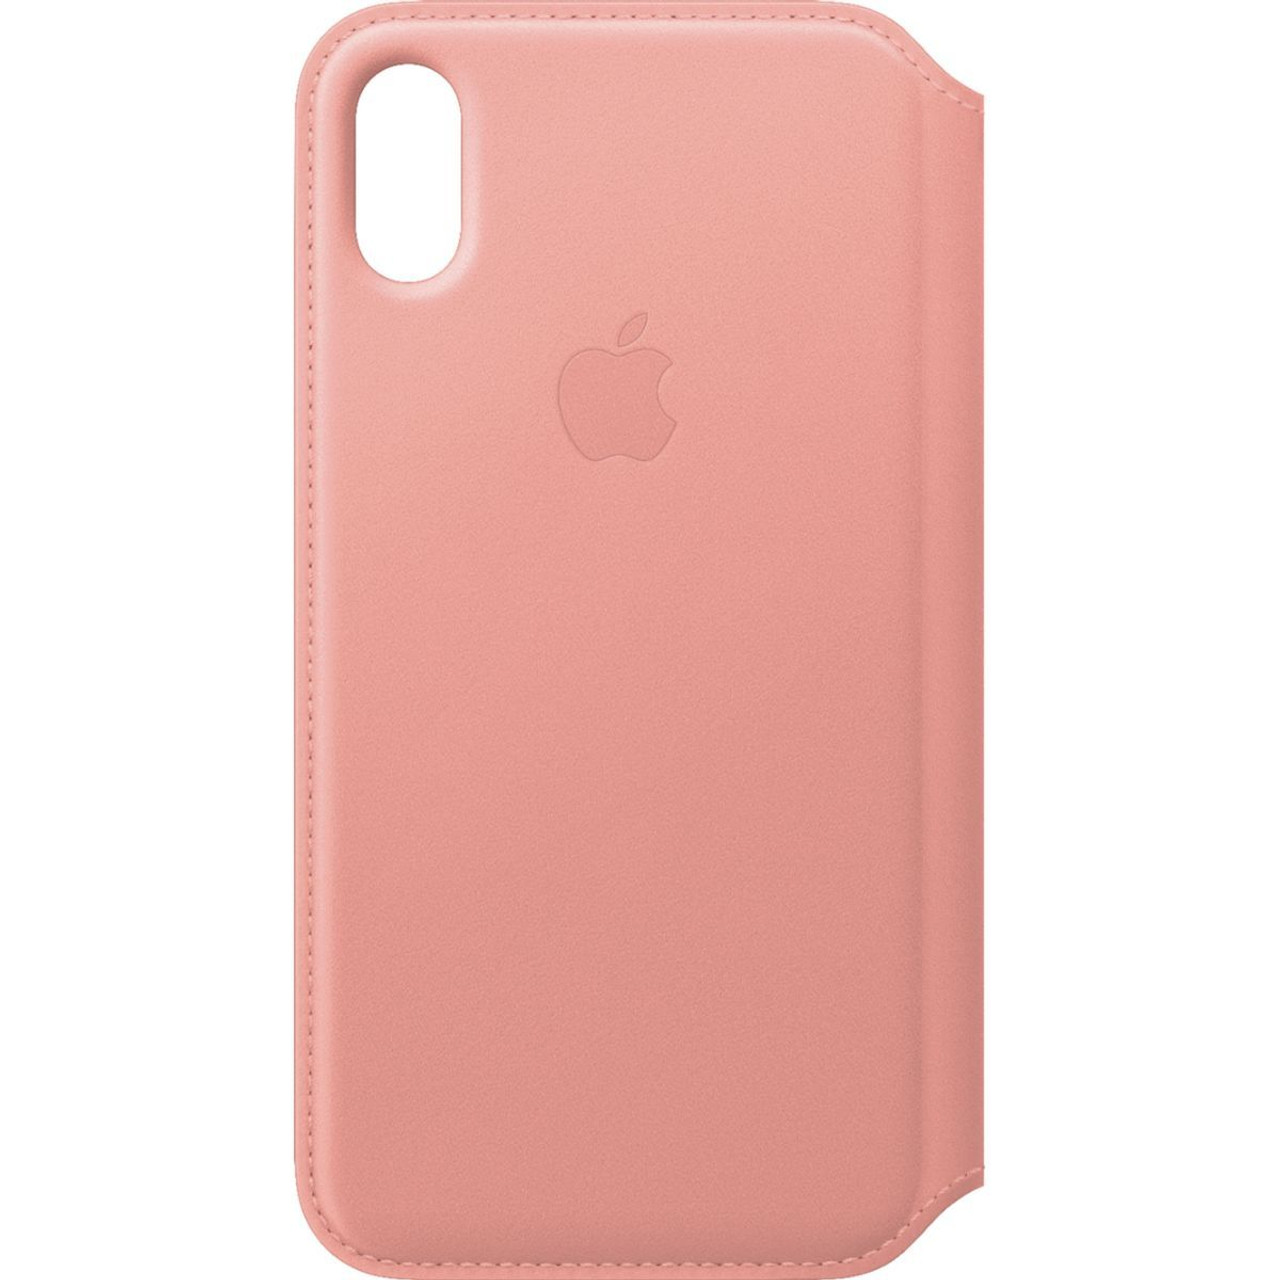 Apple Leather Folio for iPhone X product image